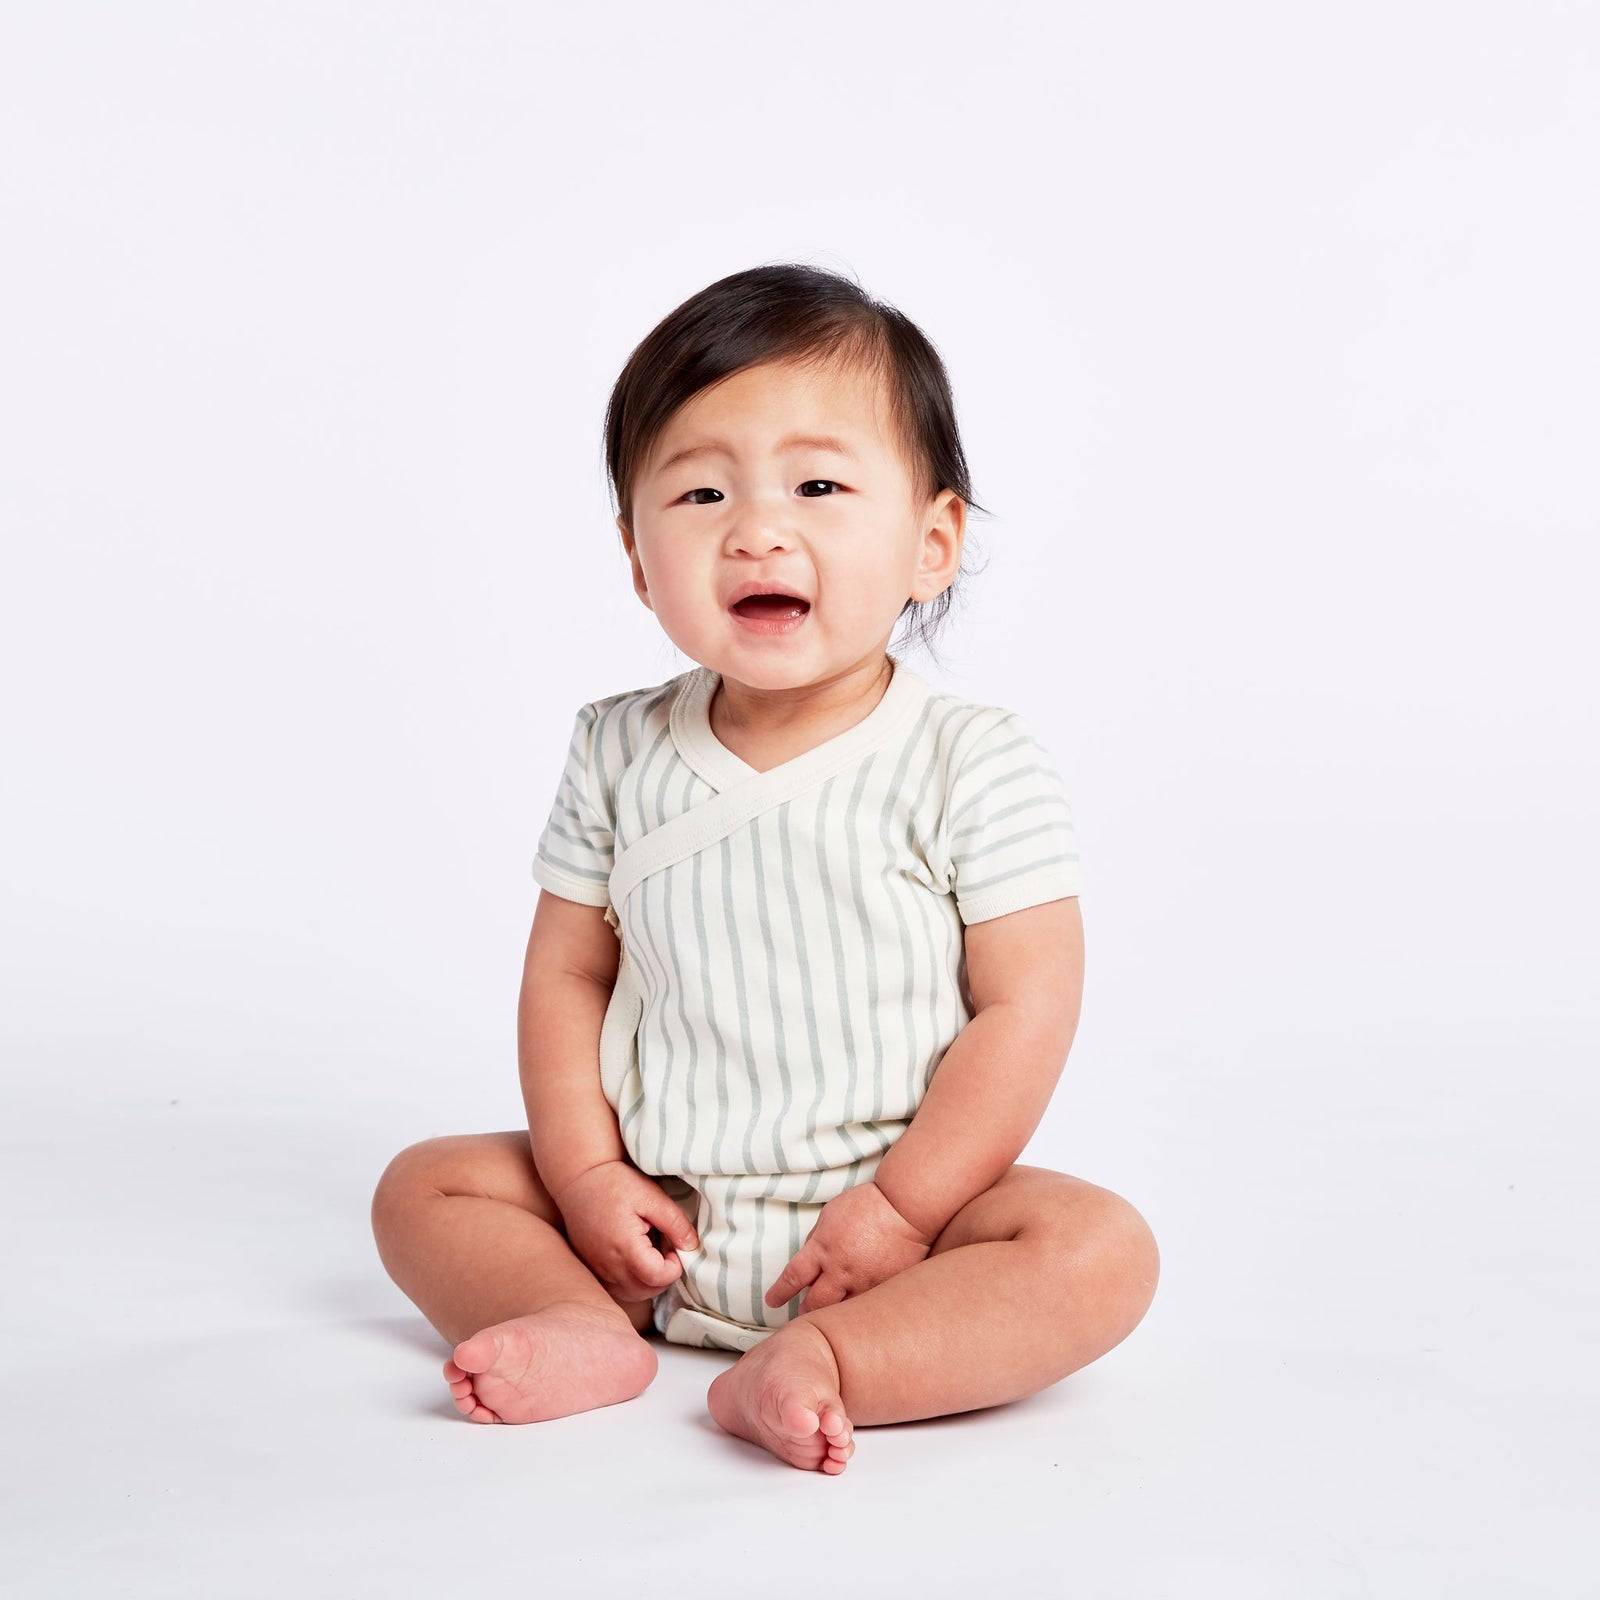 Baby wearing Pehr Stripes Away Sea Organic Kimono One-Piece, Short Sleeve. GOTS Certified Organic Cotton & Dyes. White with light blue stripes.